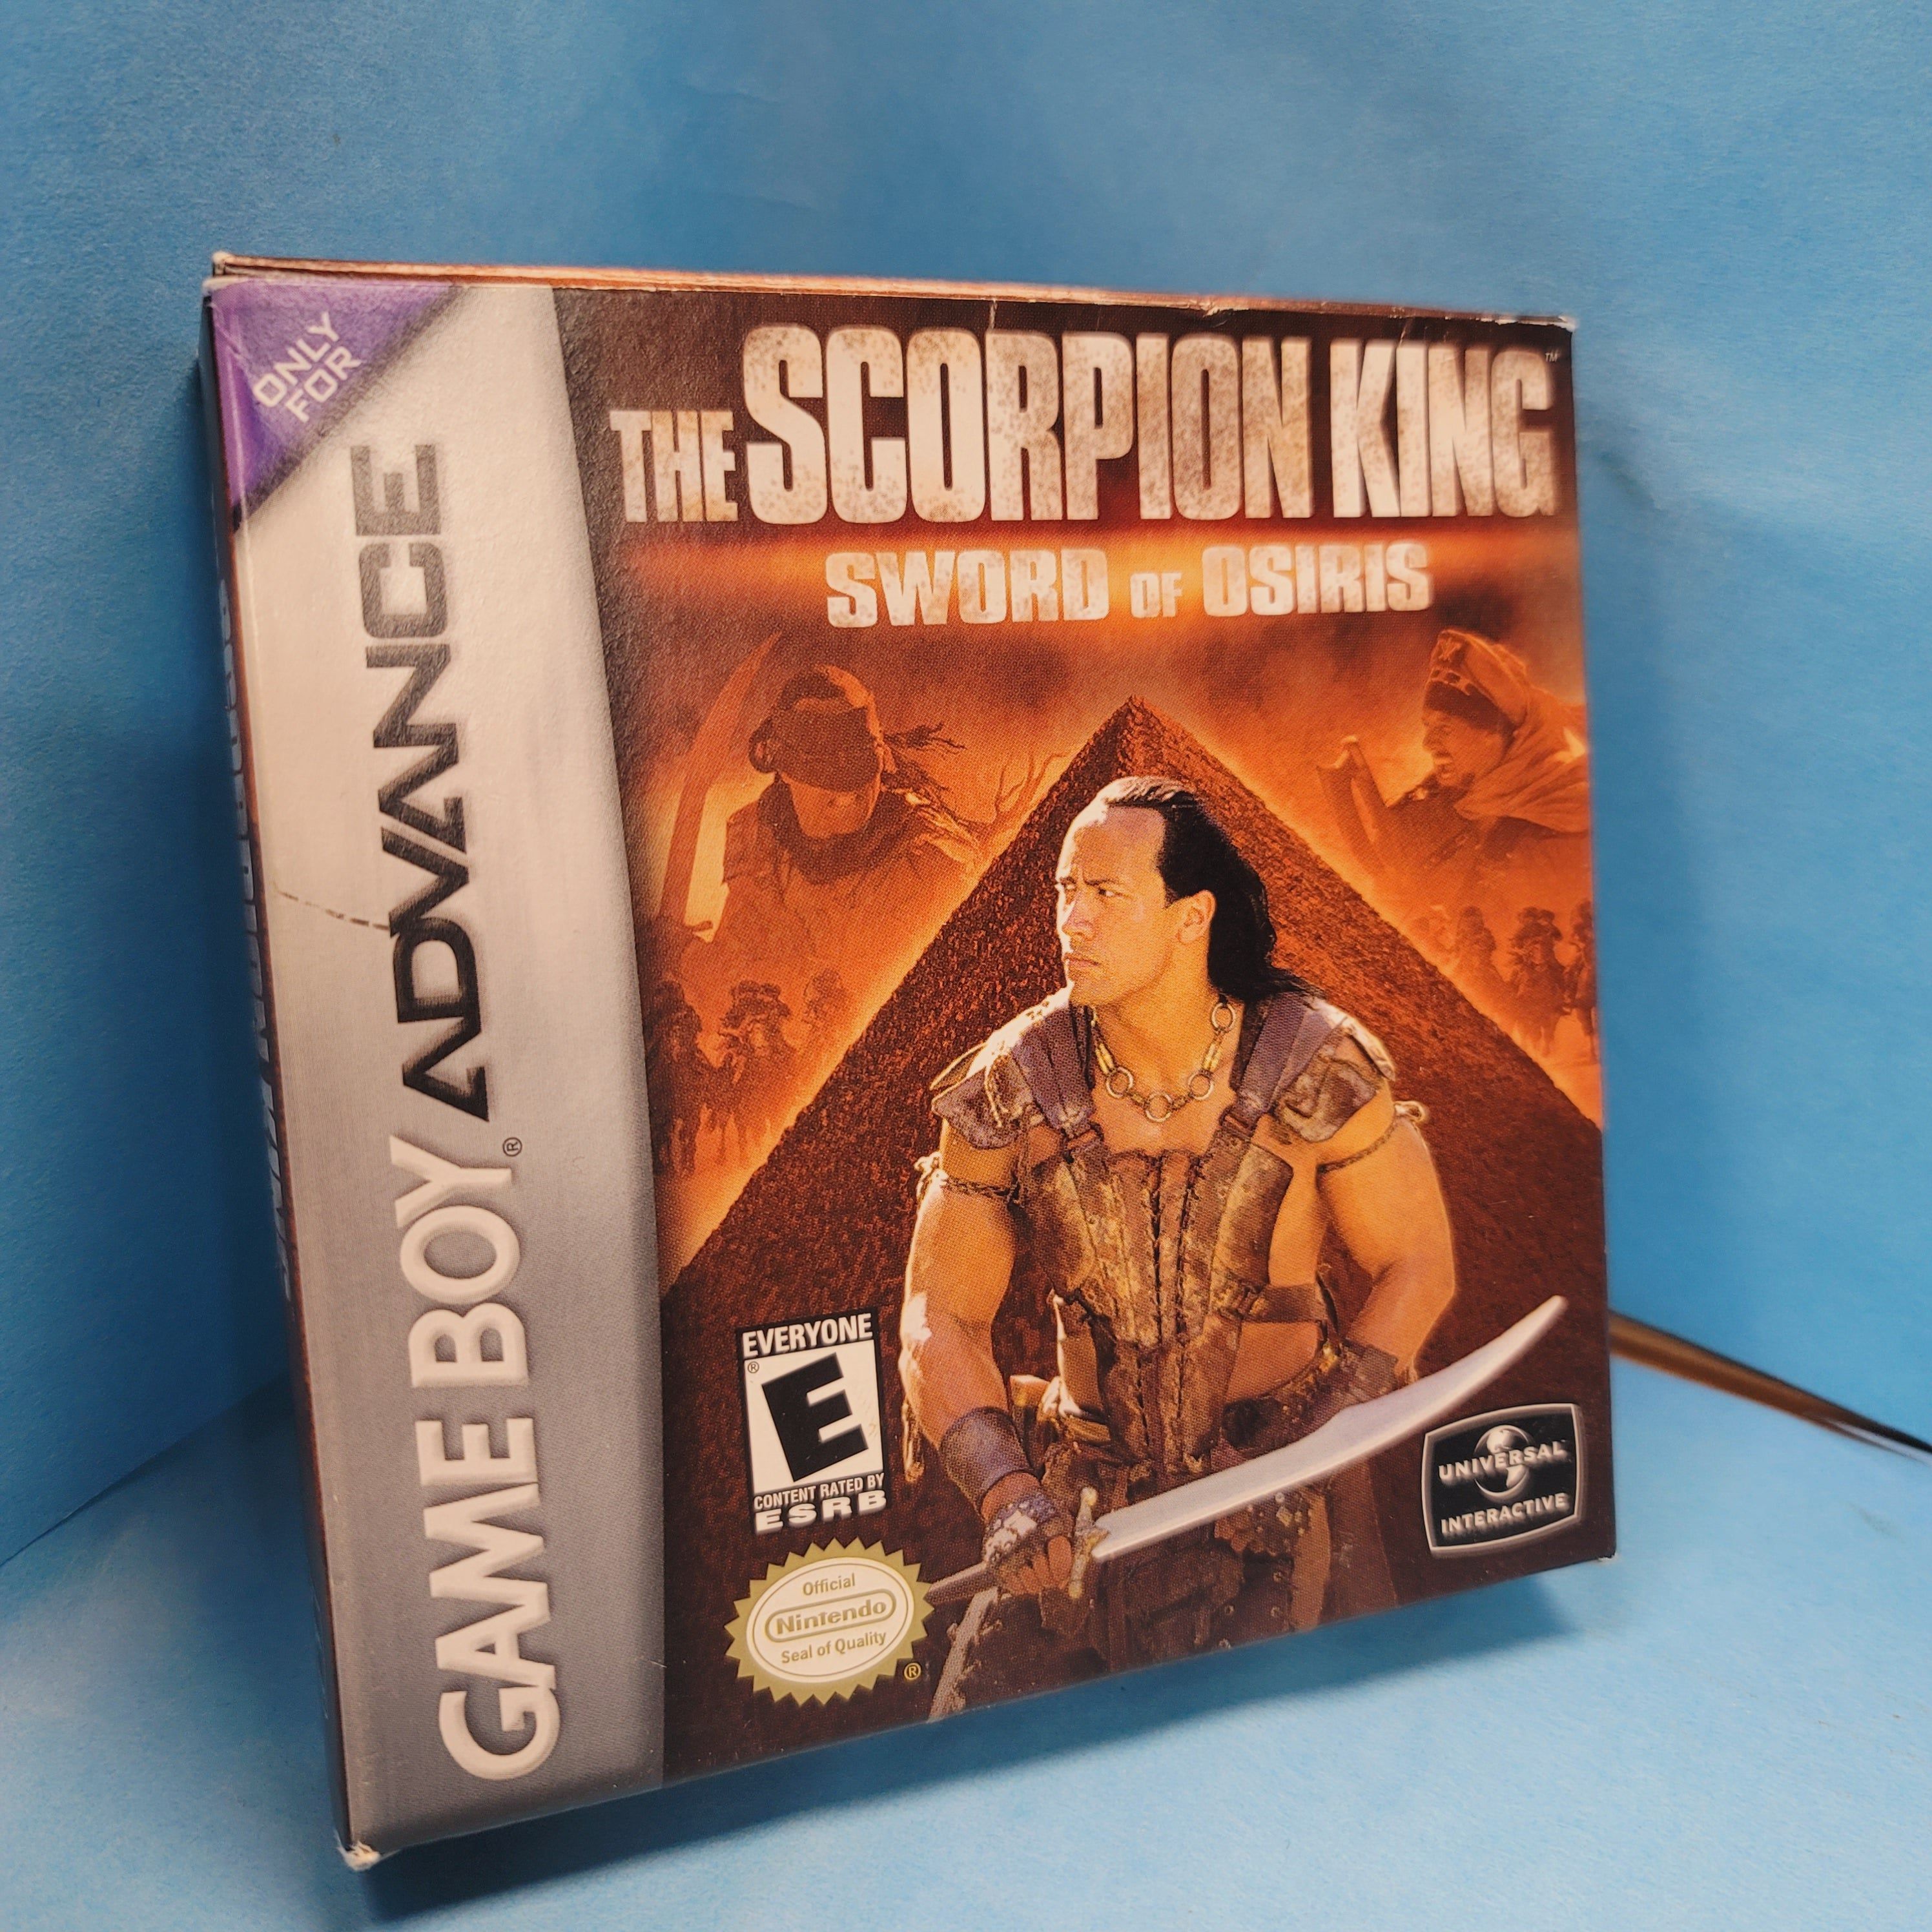 GBA - The Scorpion King Sword of Osiris (Complete in Box / A / With Manual)